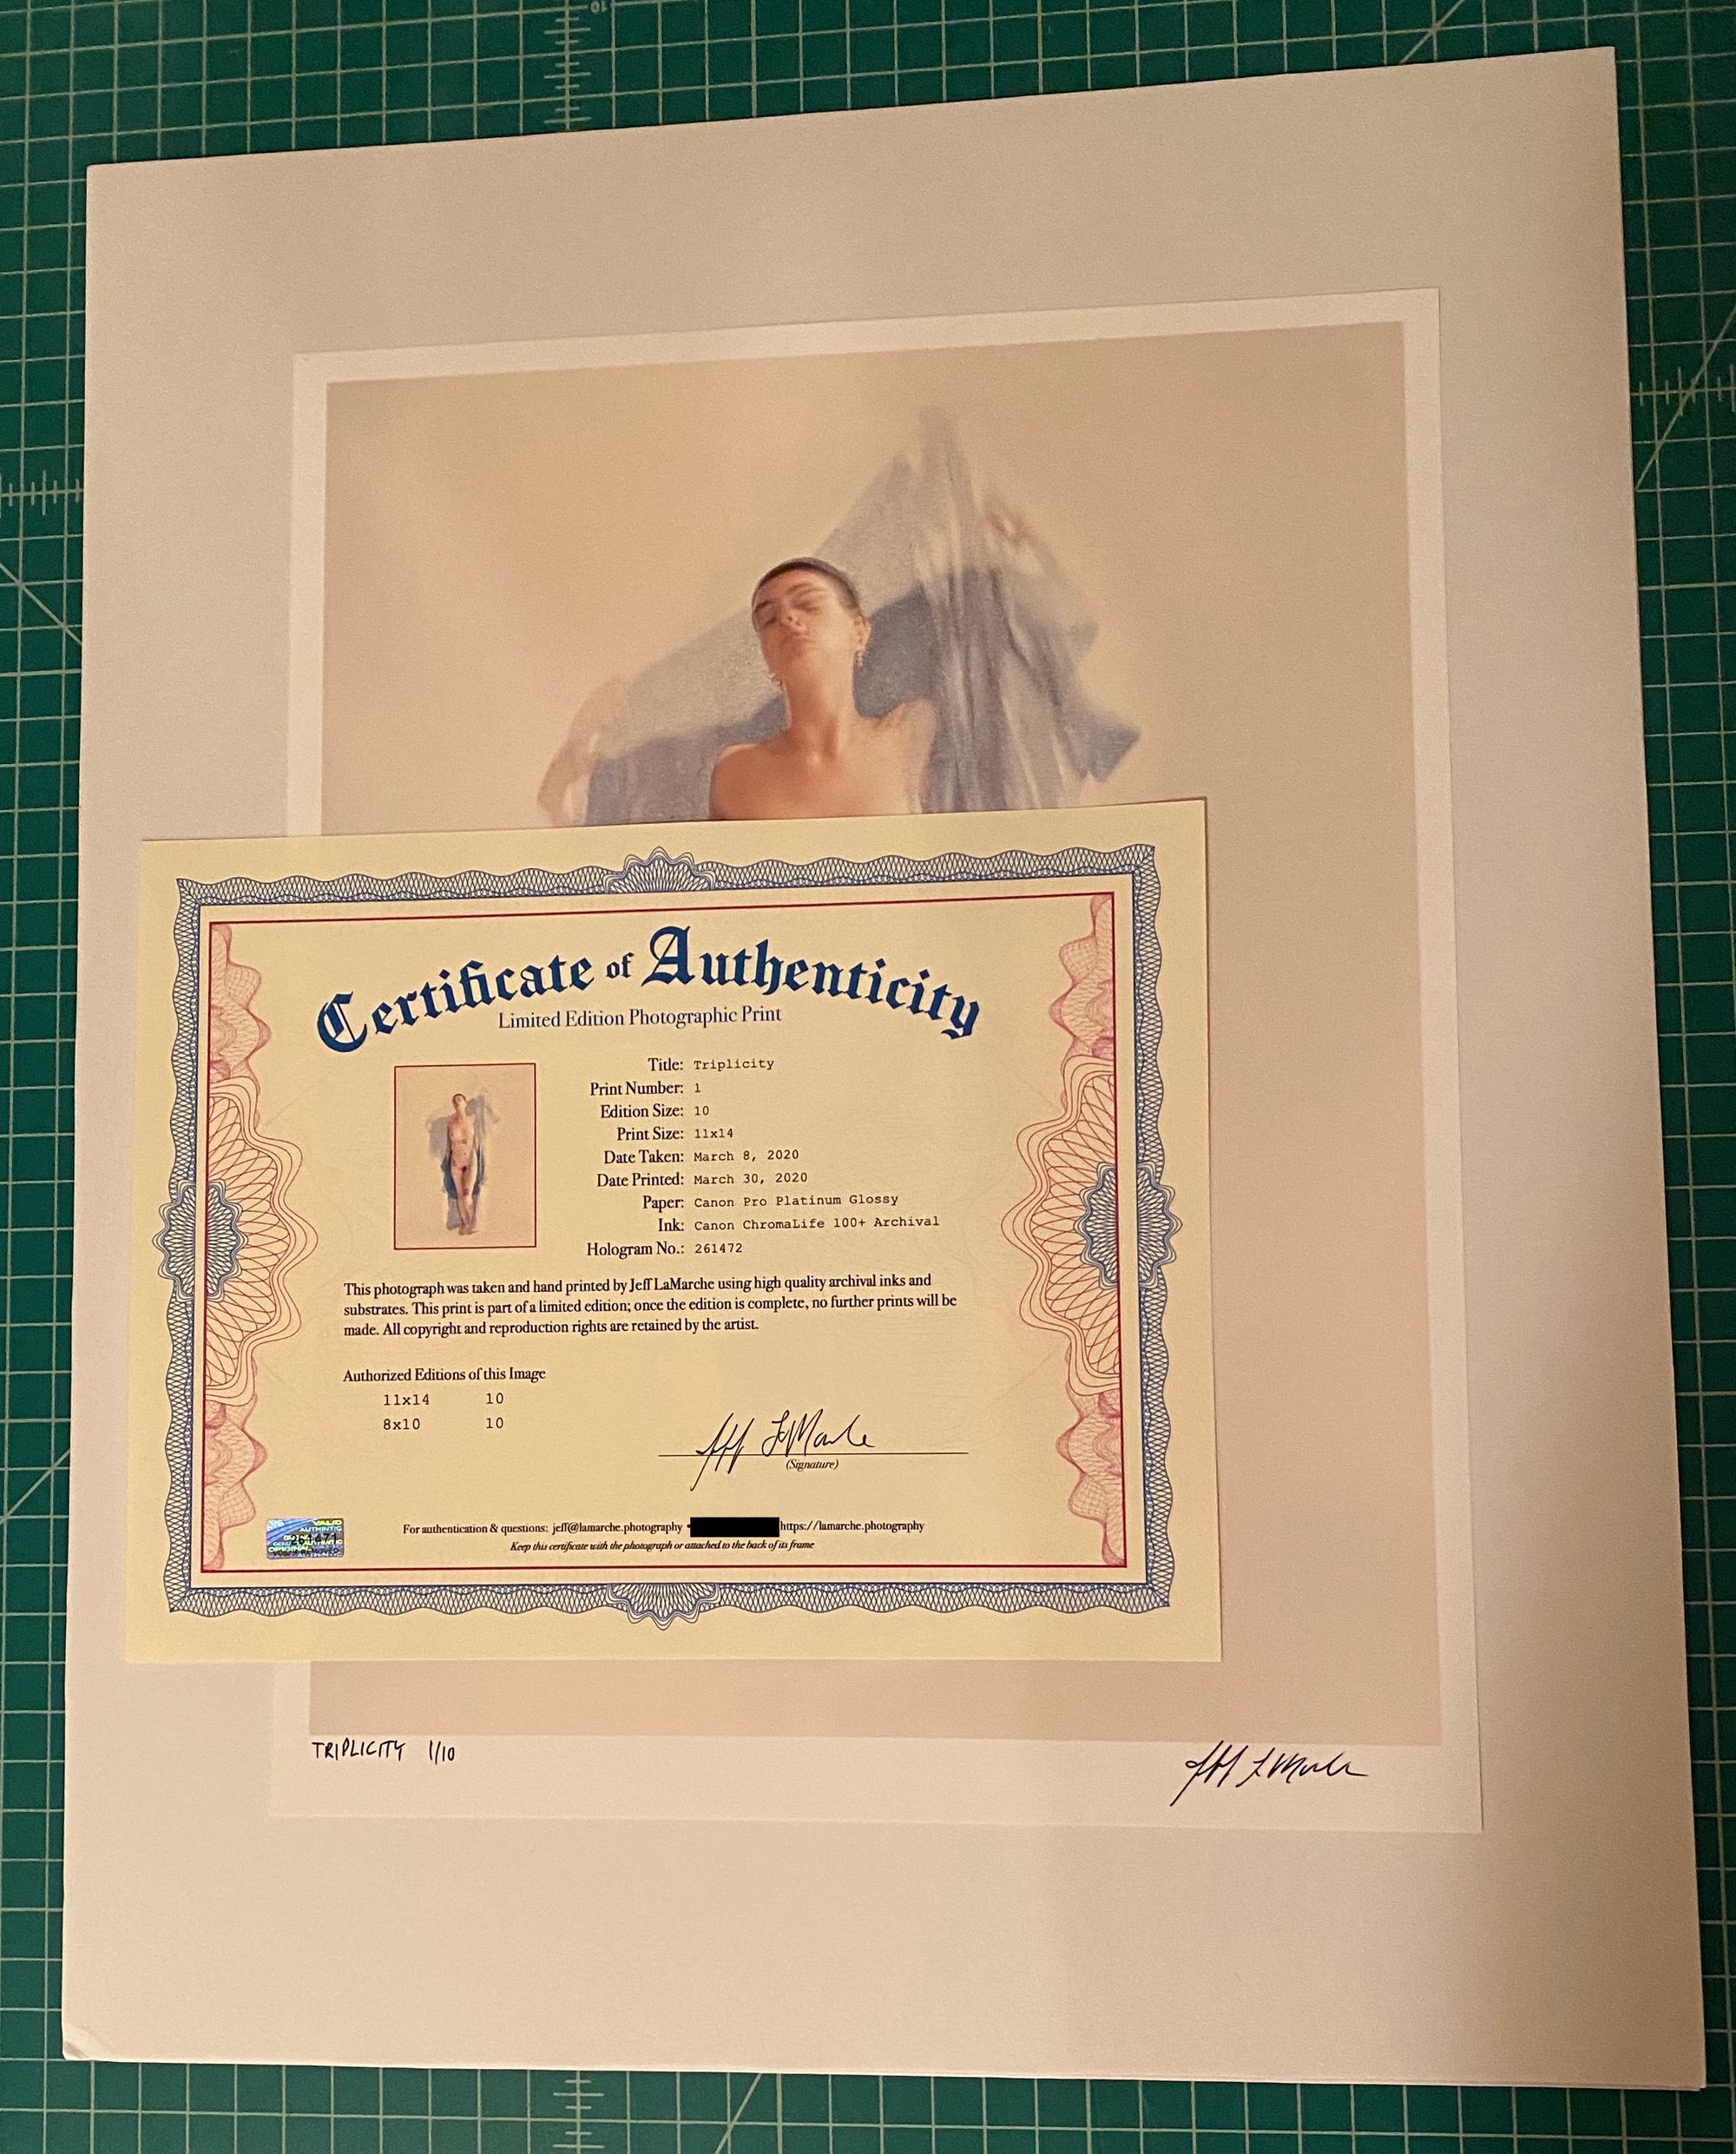 A signed, limited edition print and a certificate of authenticity for that print.